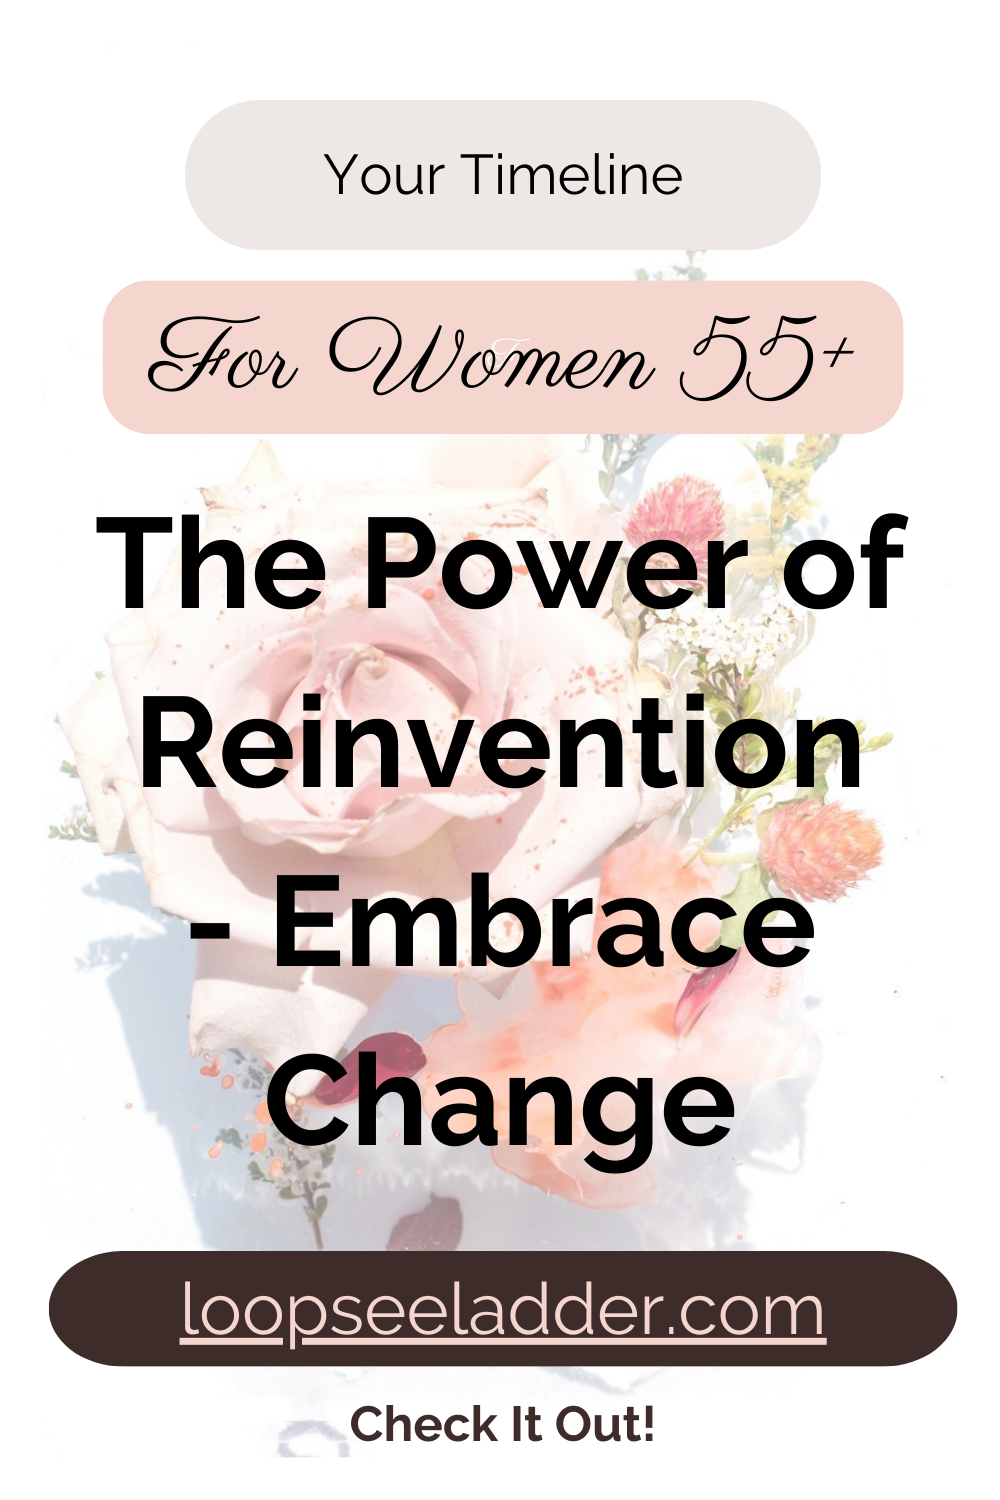 The Power of Reinvention: How Women 55+ are Embracing Change and Crafting Extraordinary Lives